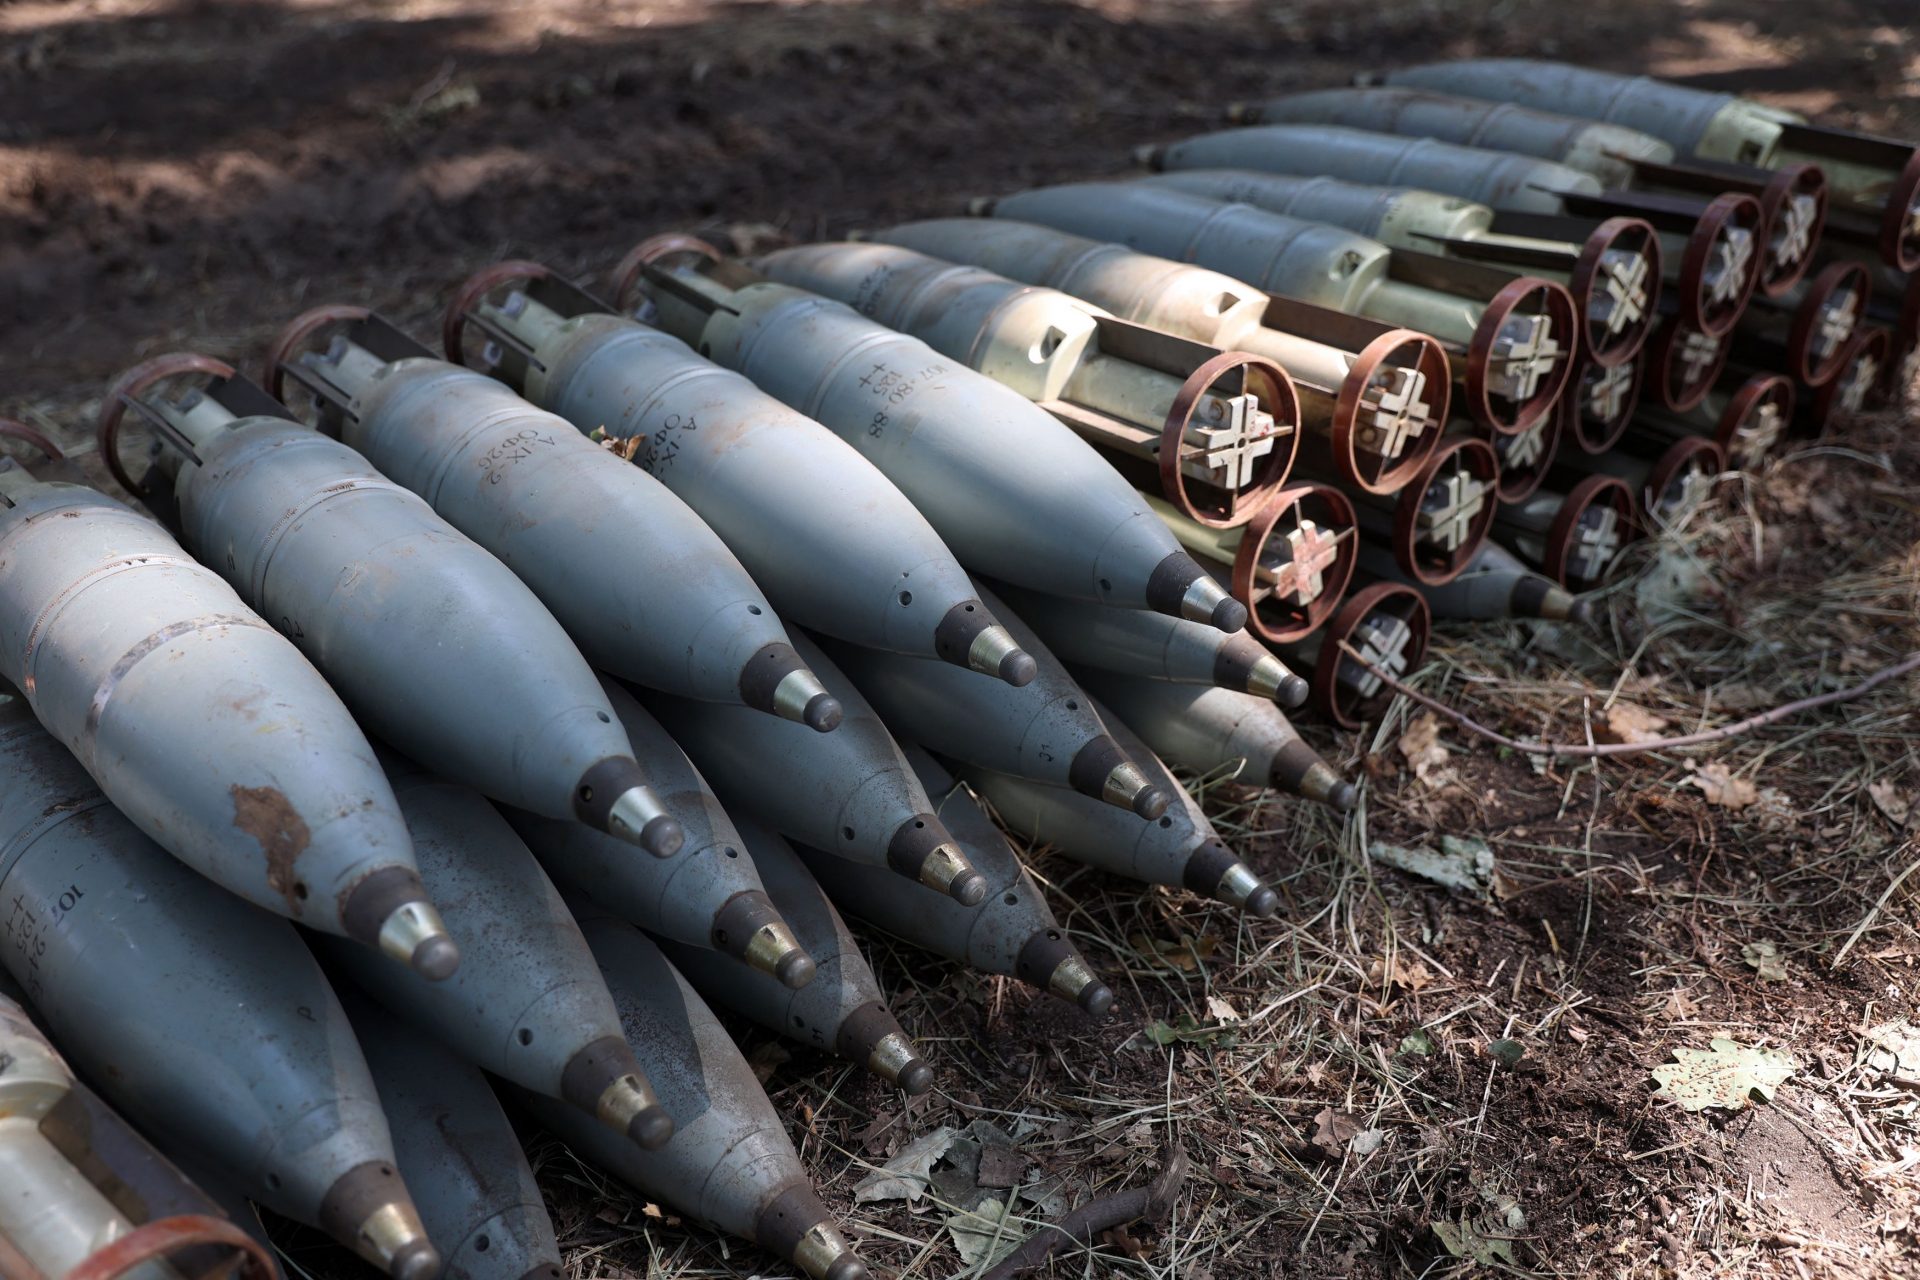 Exploring the depleted uranium shells the US said it would send to Ukraine